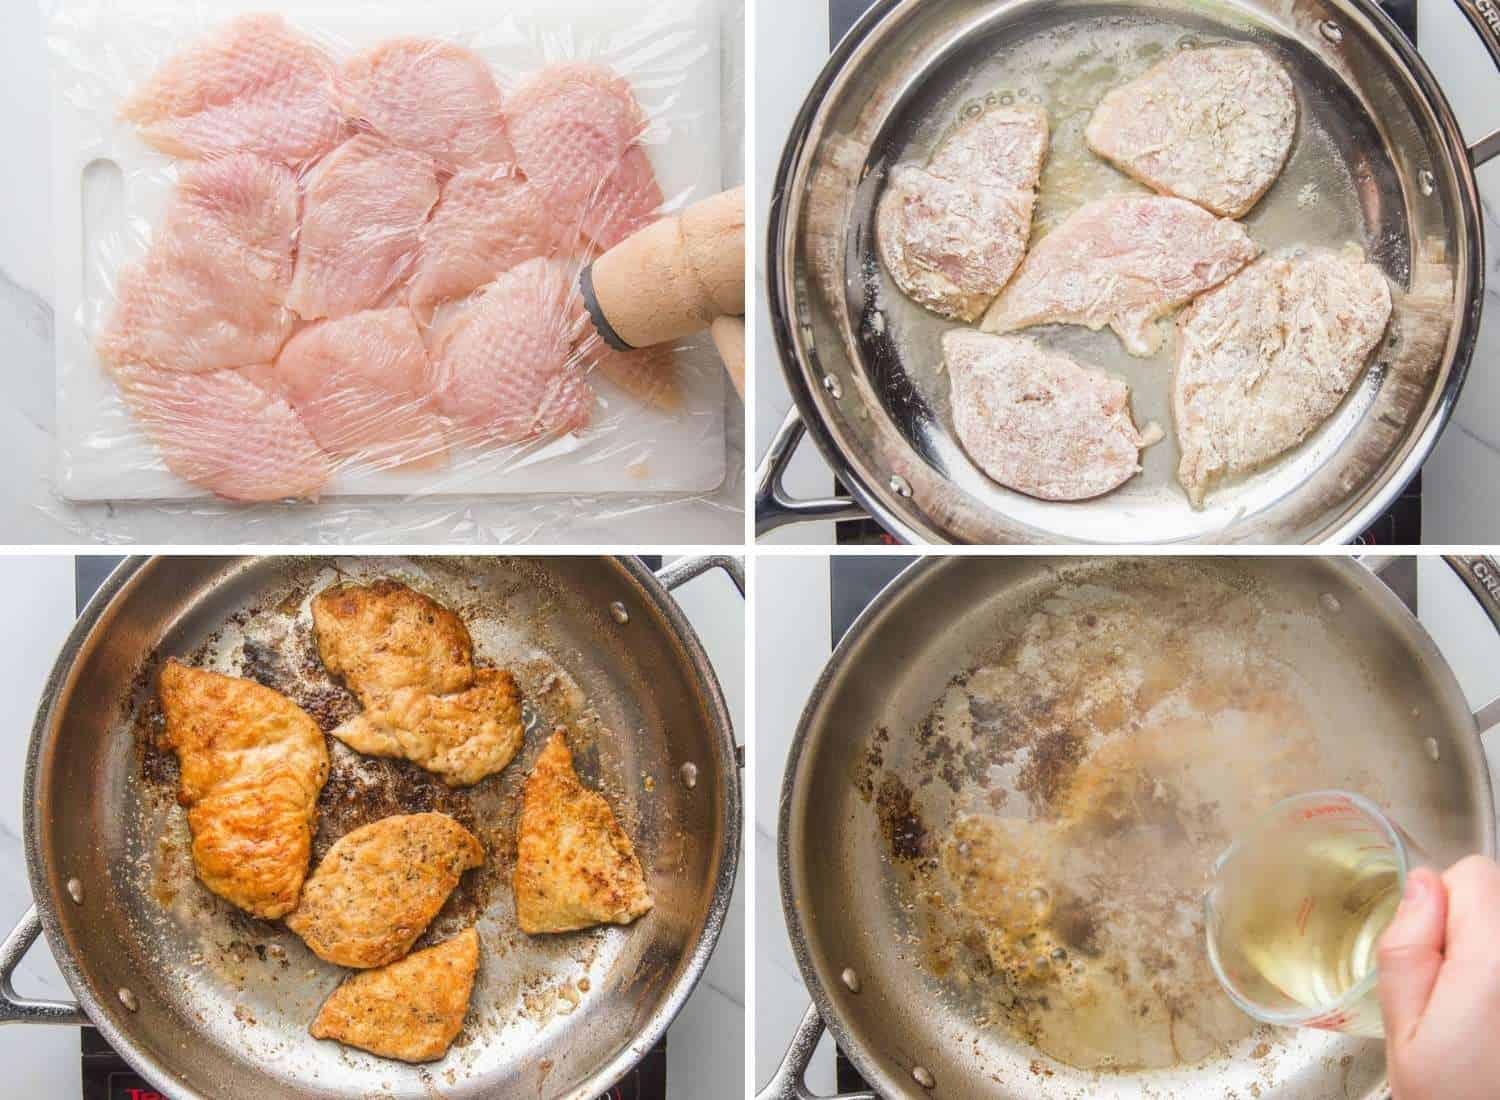 Collage of 4 images showing how to pound chicken breasts then pan fry them and deglaze the pan with wine